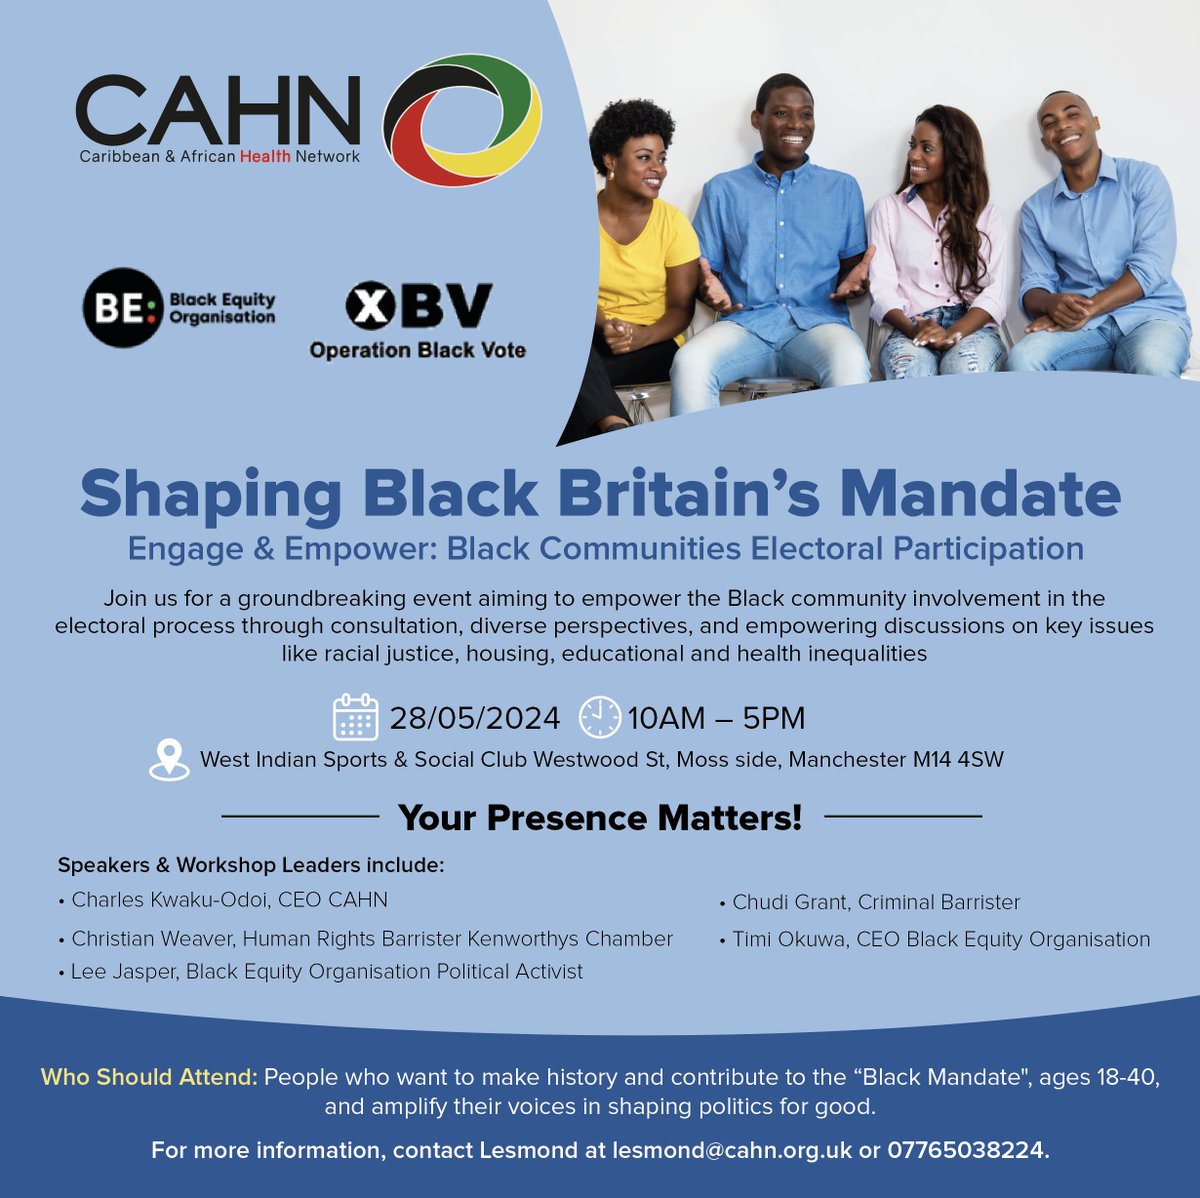 Engage & Empower: Black Communities Electoral Participation. Join us on 28/05/2024, 10AM-5PM, at West Indian Sports & Social Club, Moss Side, Manchester. Hear from inspiring speakers. Register today: portal.cahn.org.uk/blackmandateev… #BlackMandate